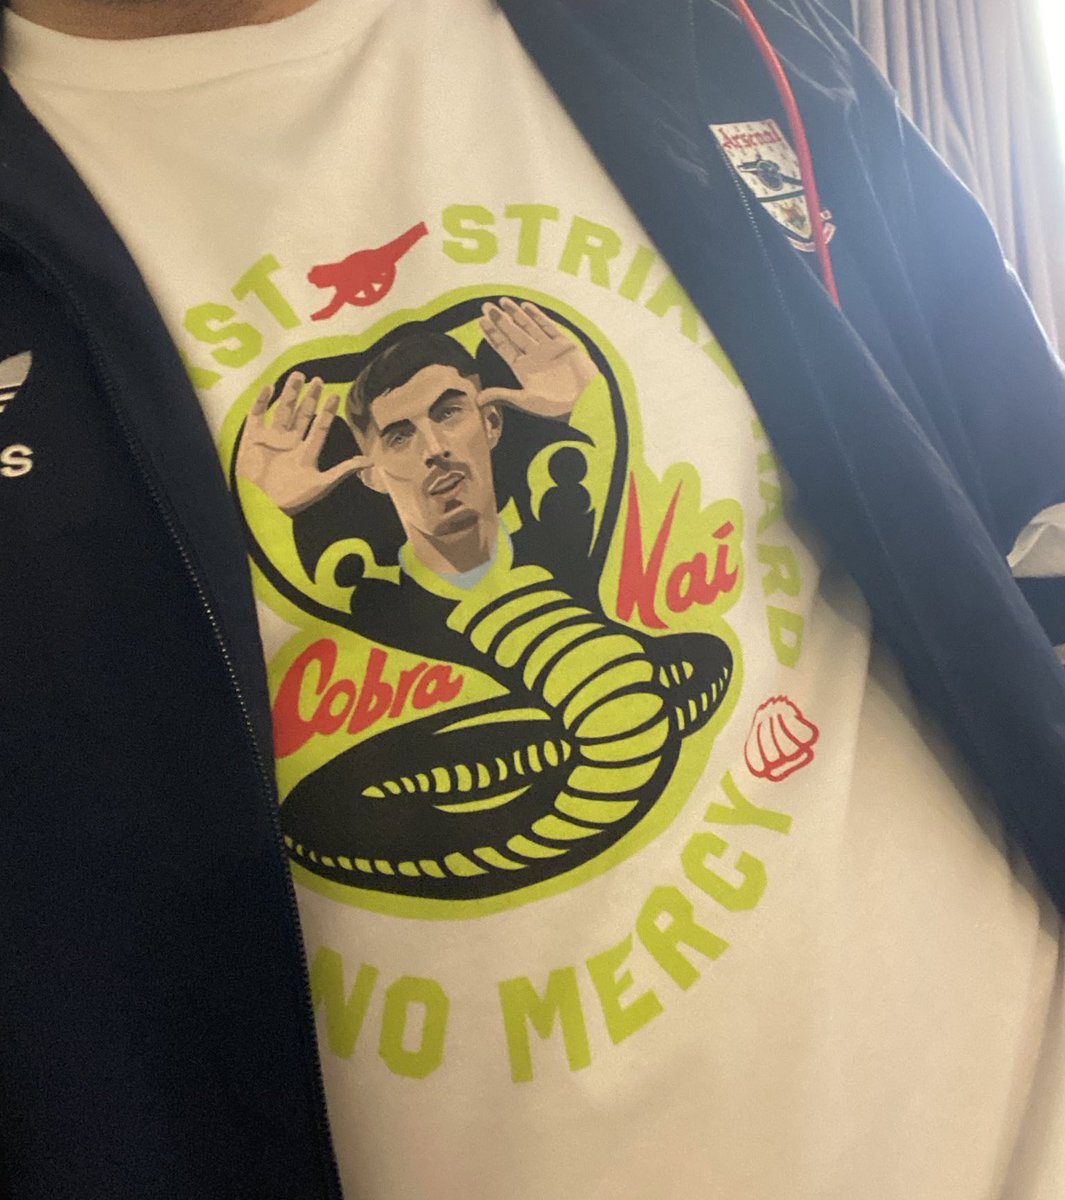 🐍 Cobra Kai Competition 🐍 If Havertz scores today, I’ll give away one of these popular Cobra Kai Tees. To enter… 🔄 RT 🔴⚪️ Comment your score prediction carlbourkeart.co.uk/collections/te…